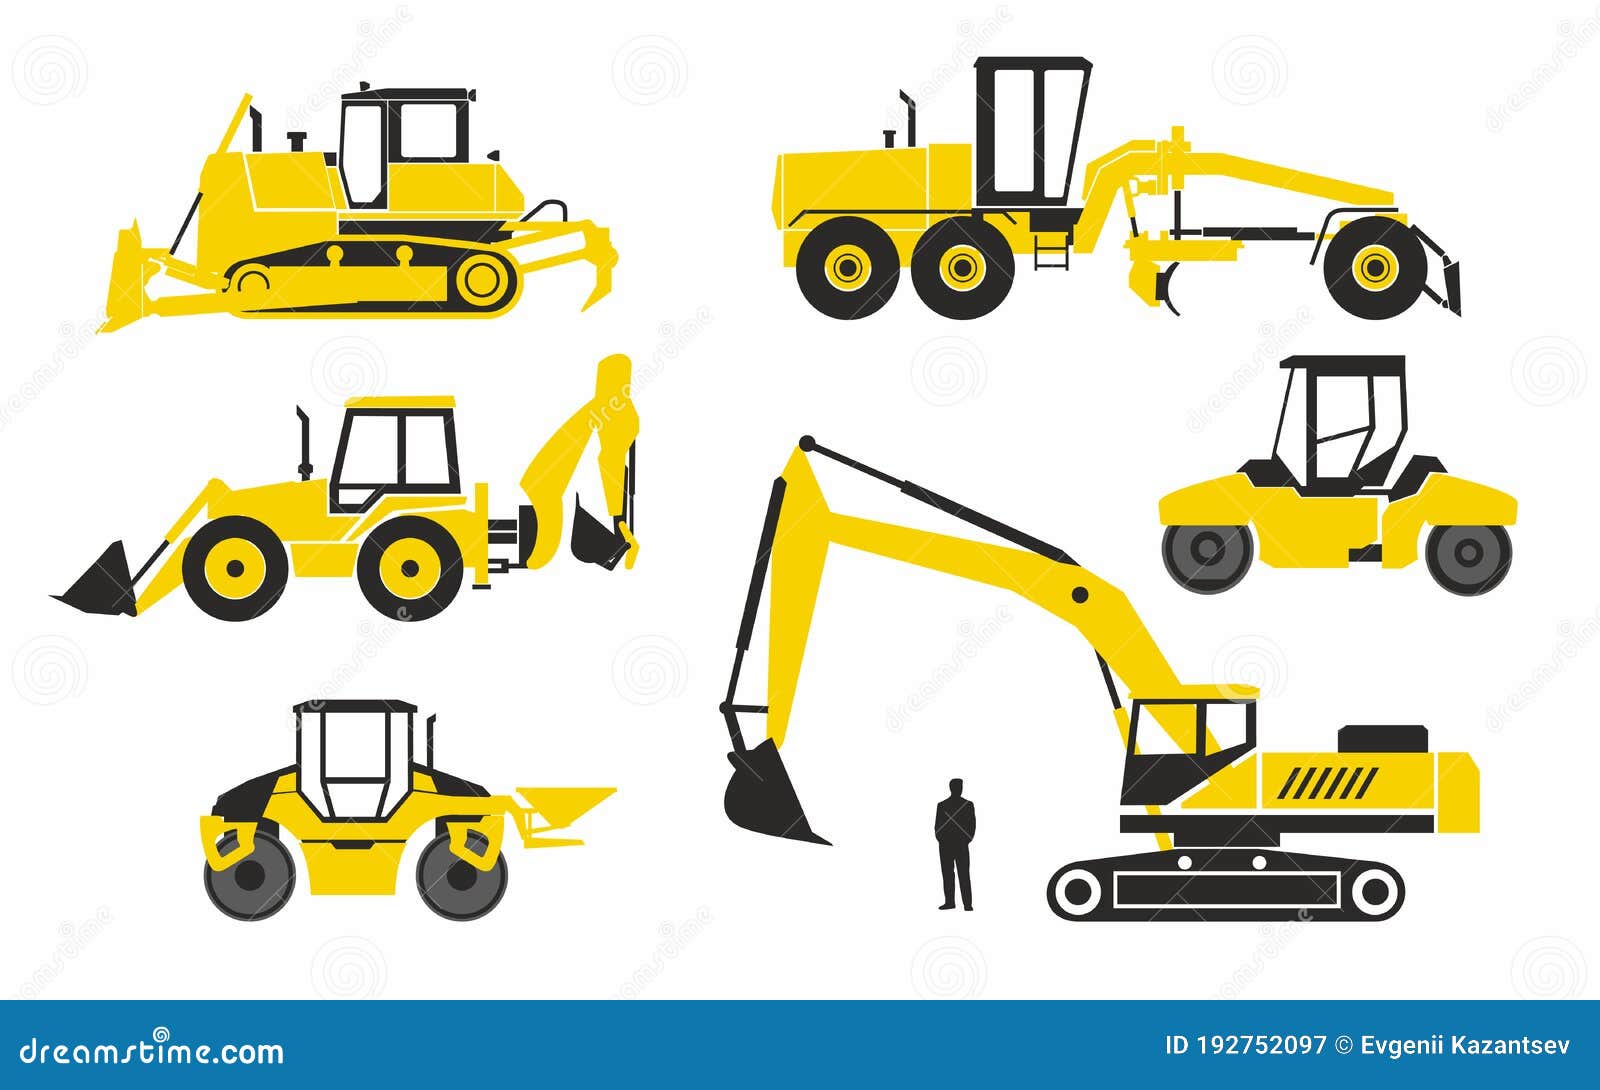 various special vehicles for road construction. stylish simplified icons. excavators, rollers and bulldozers